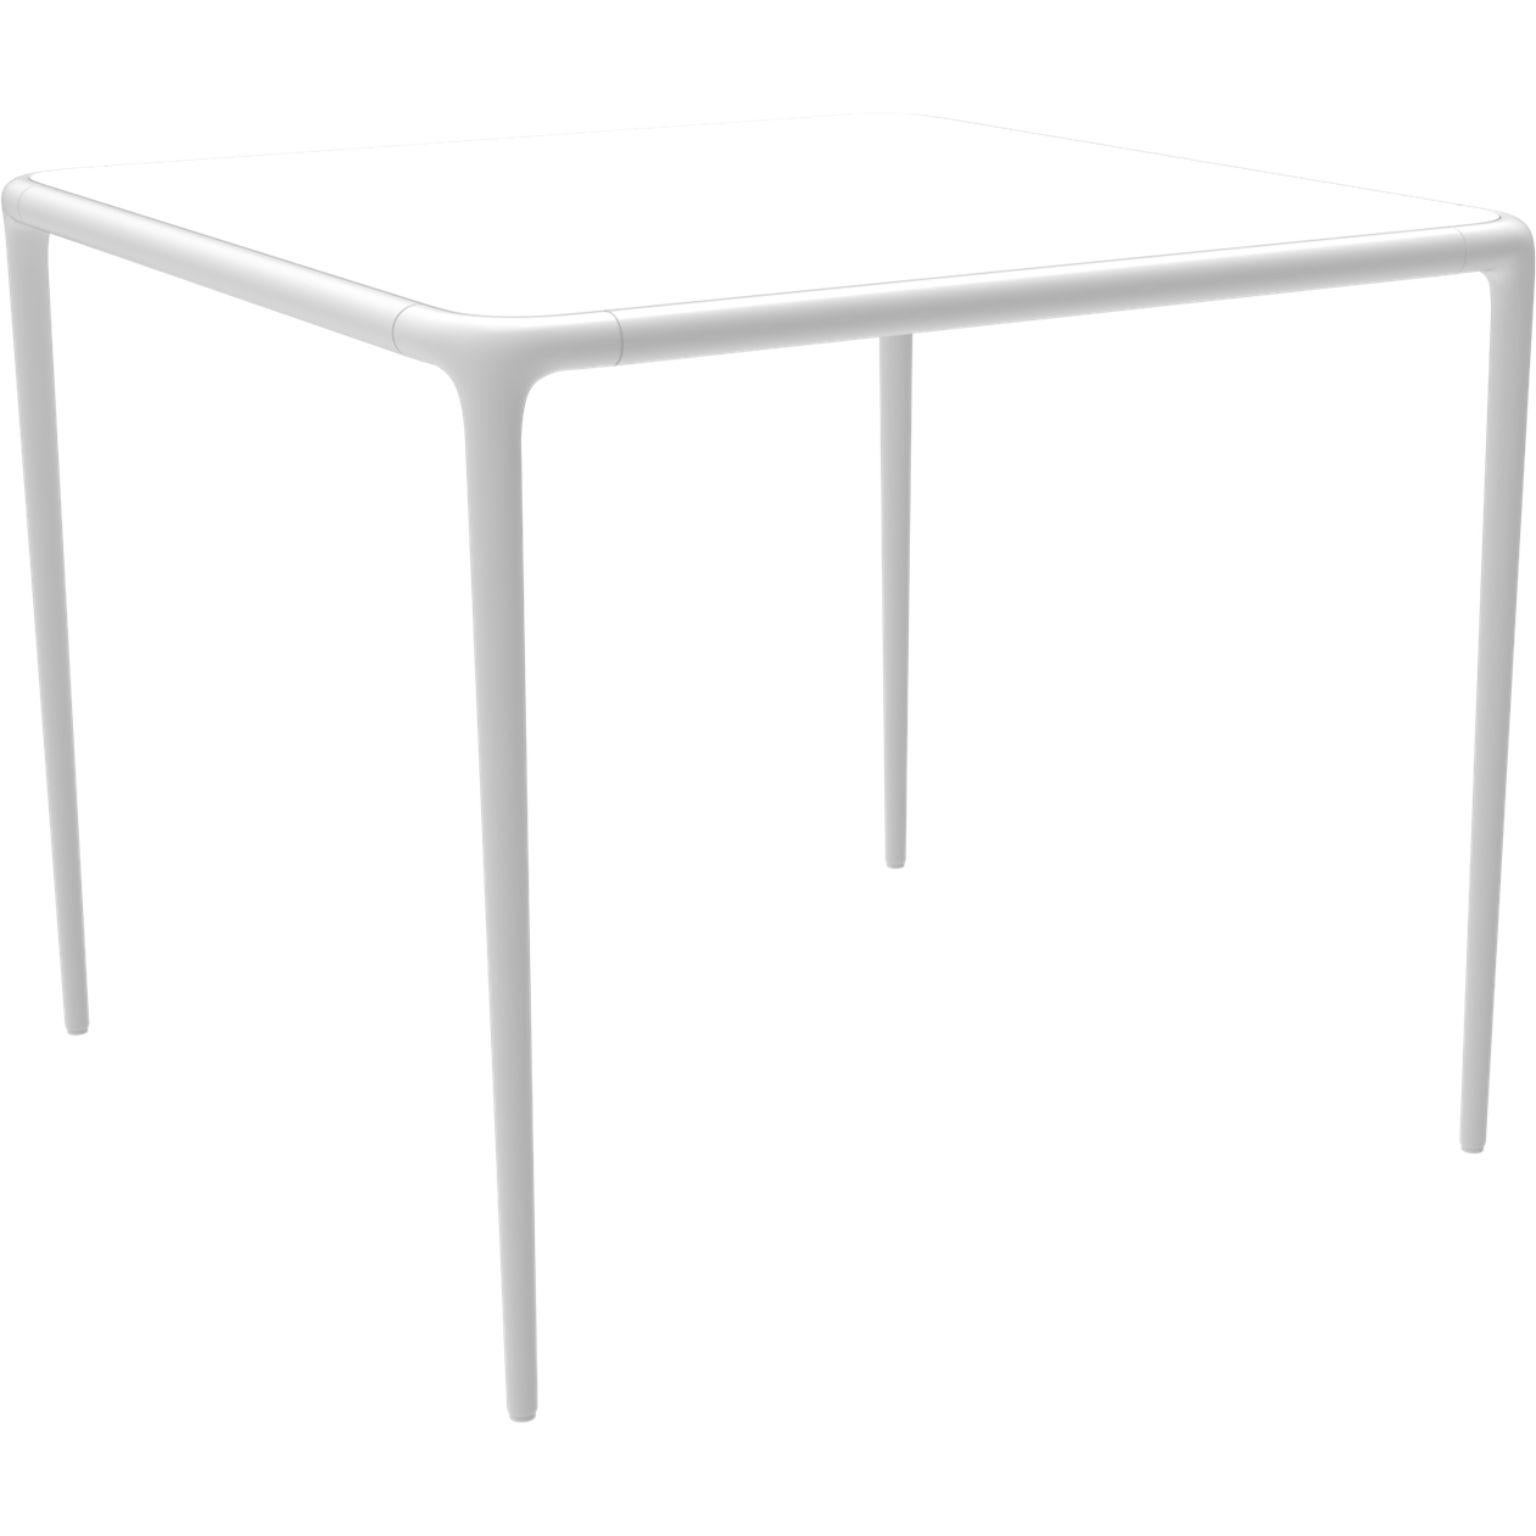 Xaloc white glass top table 90 by MOWEE
Dimensions: D90 x W90 x H74 cm
Material: Aluminum, tinted tempered glass top.
Also available in different aluminum colors and finishes (HPL Black Edge or Neolith). 

 Xaloc synthesizes the lines of